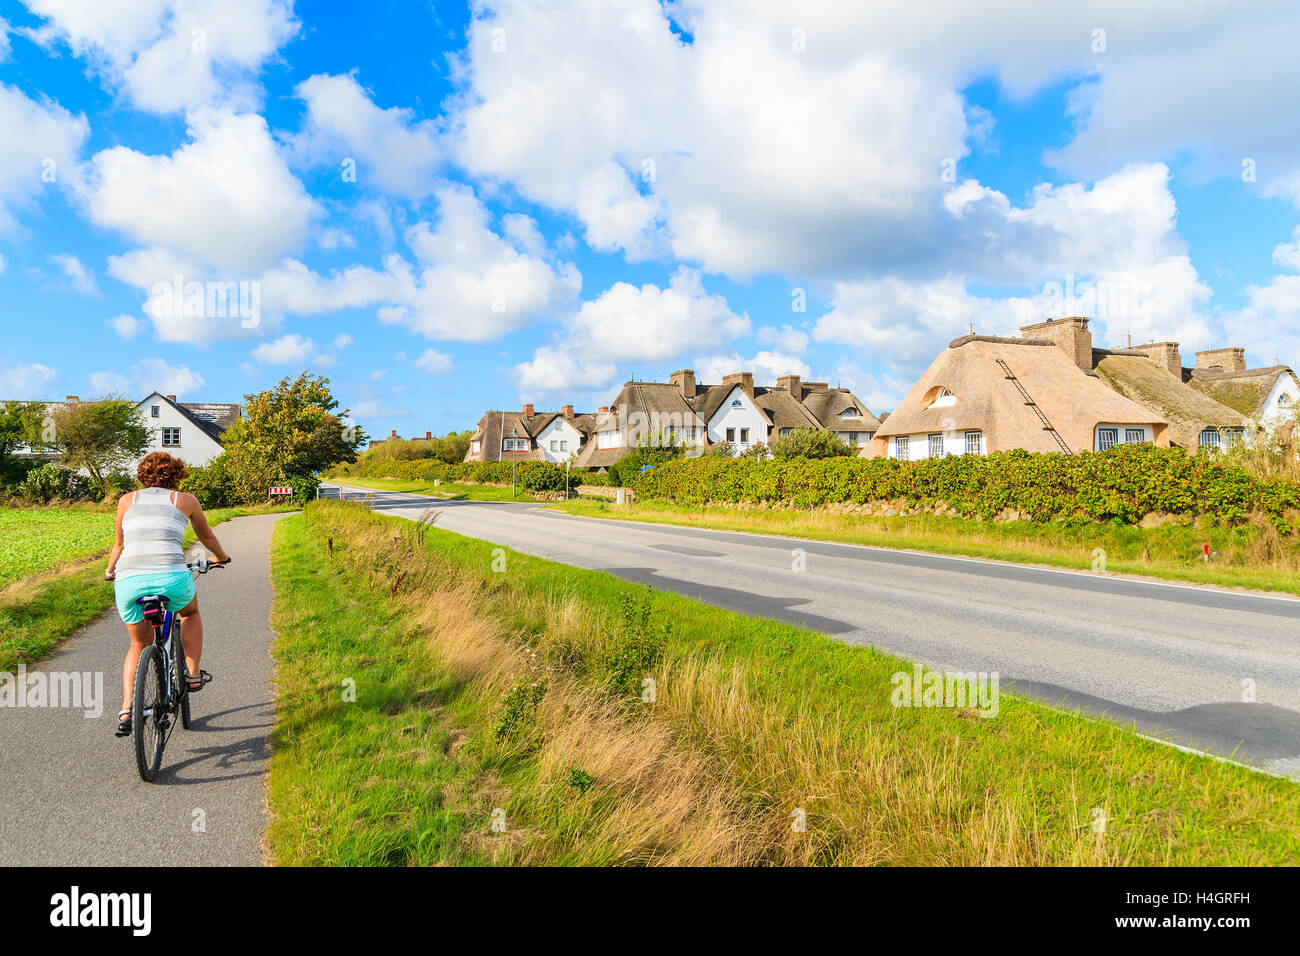 Young woman tourist rinding a bike along a road in Keitum village with typical straw roof houses on Sylt island, Germany Stock Photo